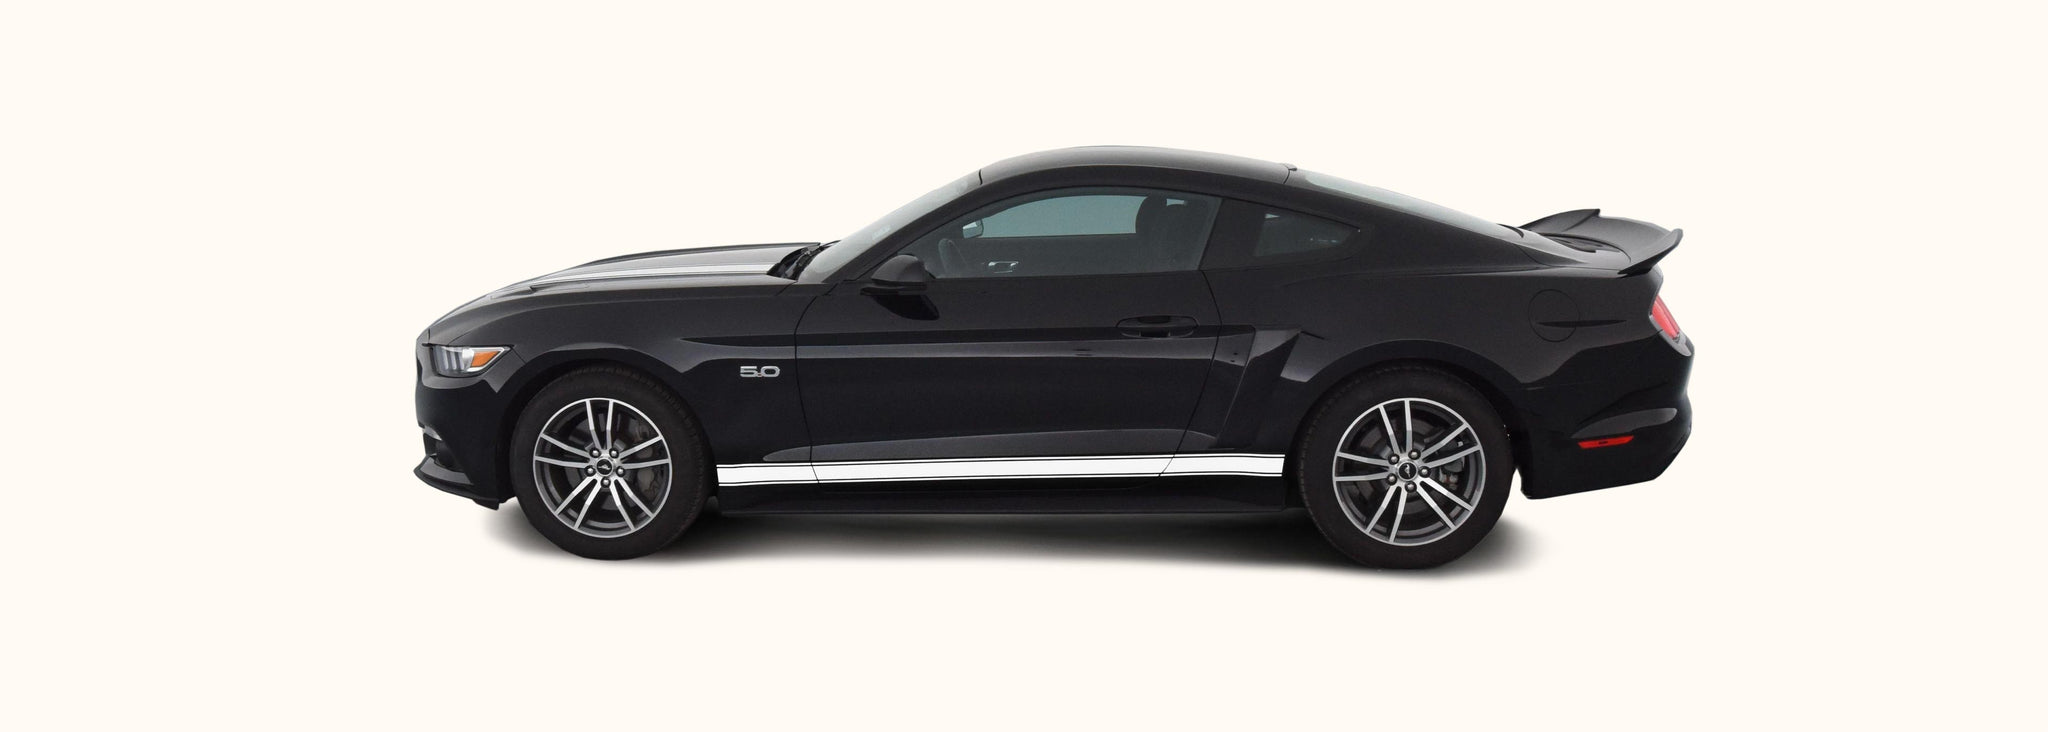 Ford Mustang Side Stripes with Optional MUSTANG Text (2015-2021) - Stripe Source